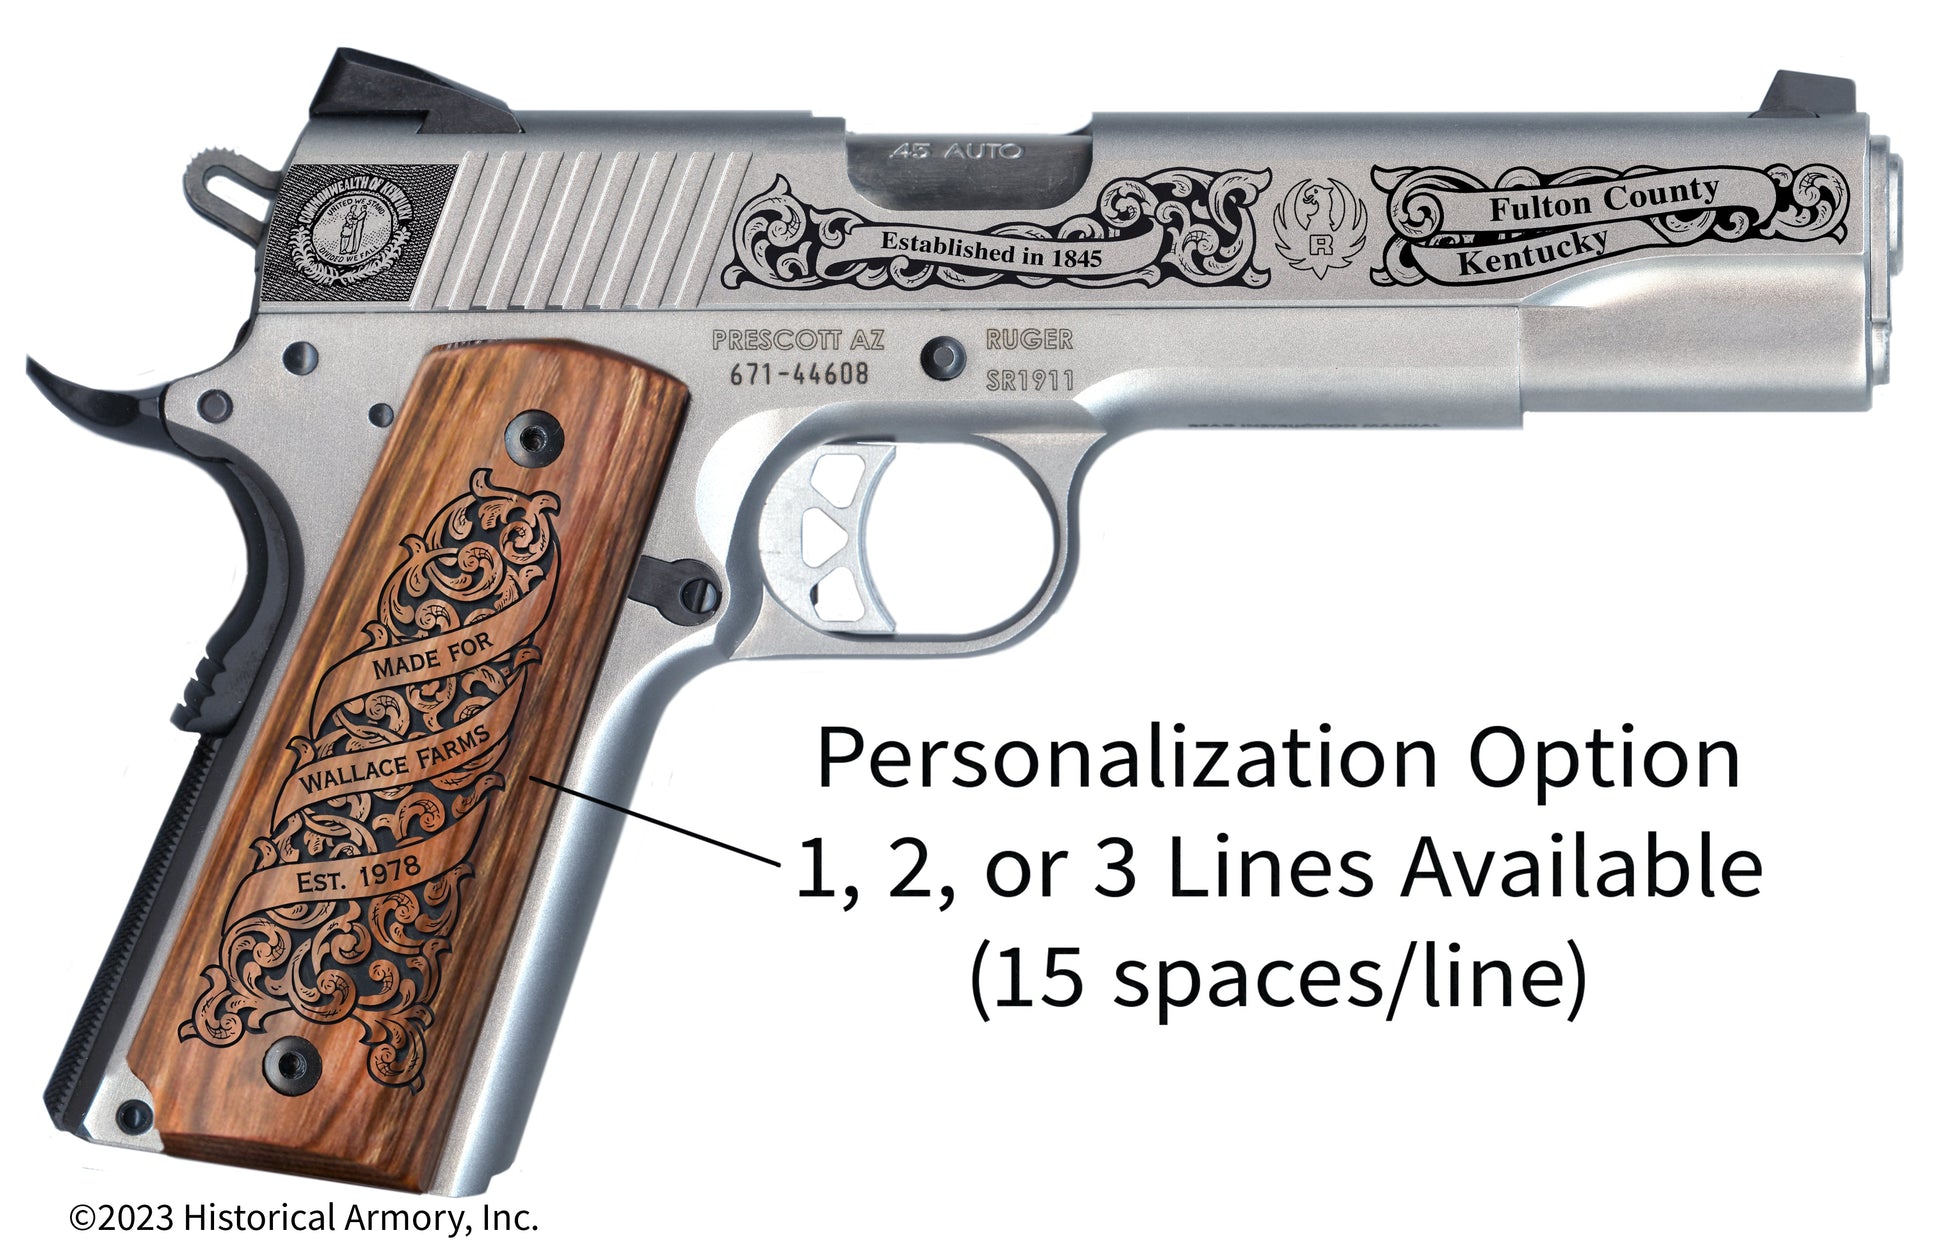 Fulton County Kentucky Personalized Engraved .45 Auto Ruger 1911